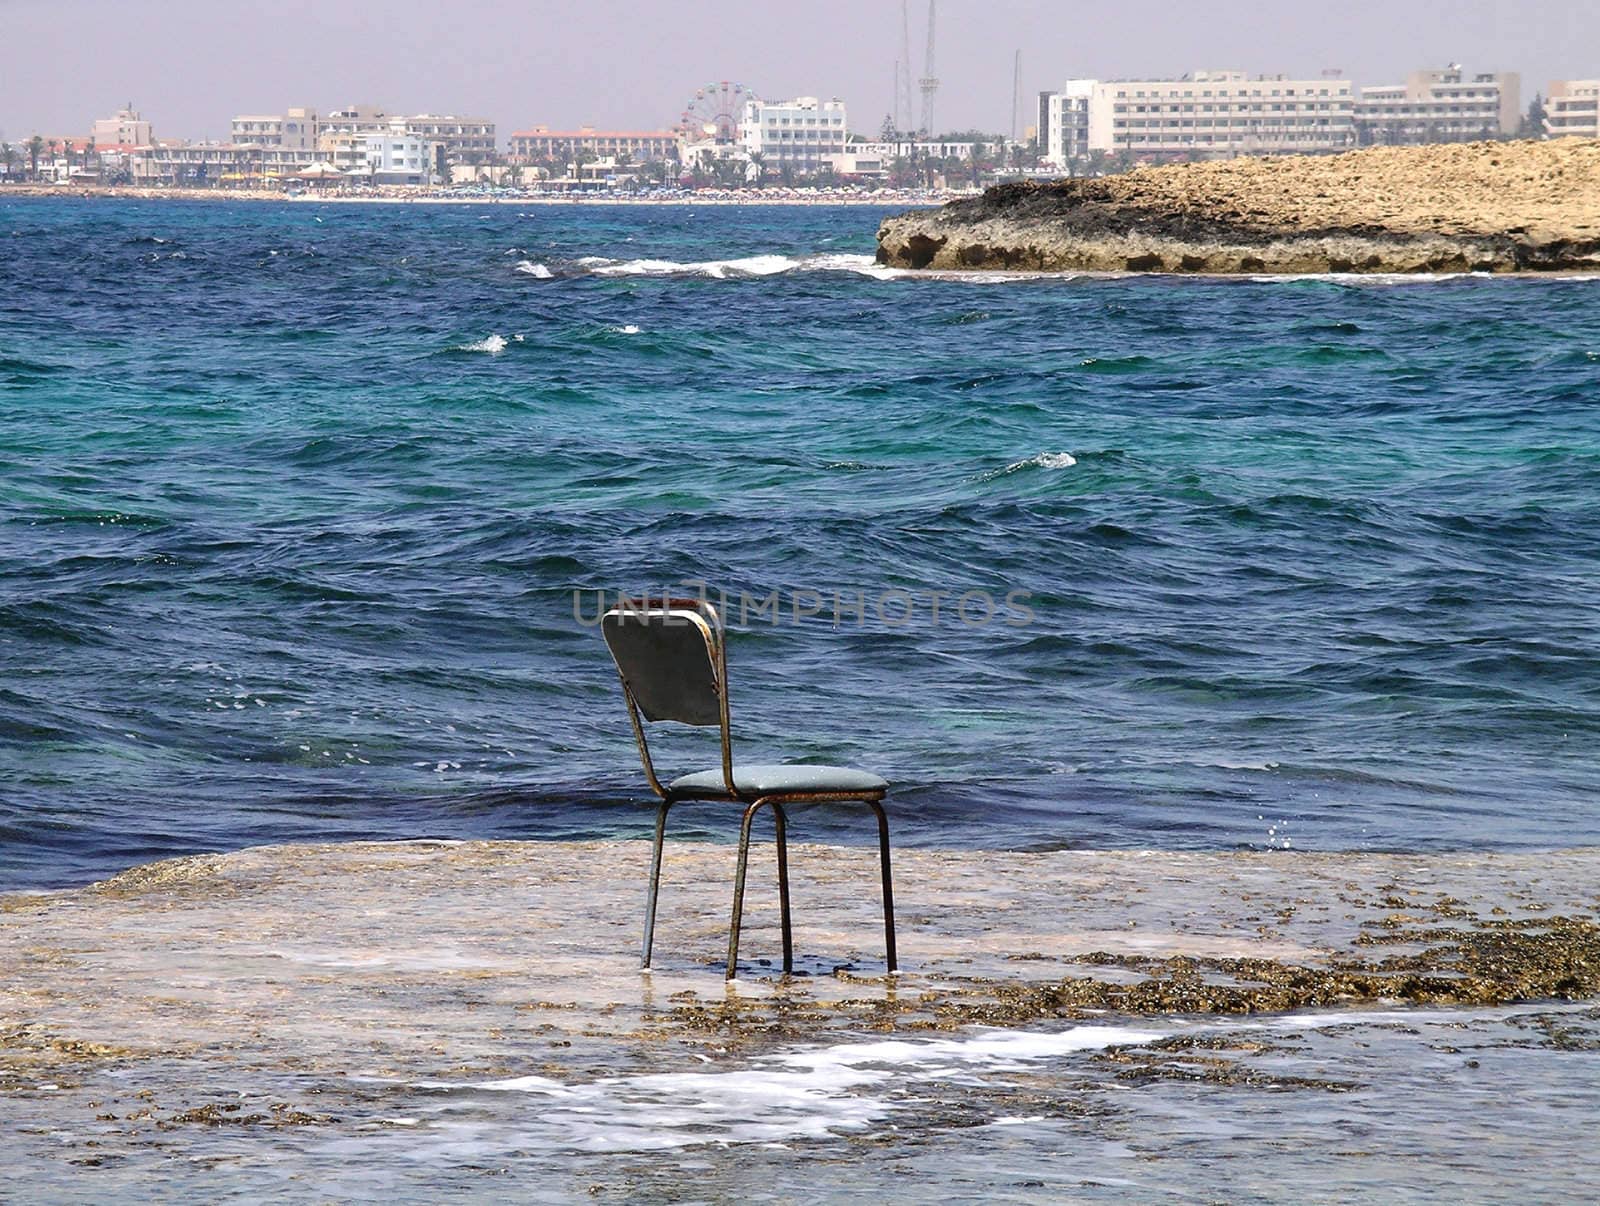 Abandoned old chair laying next to the ocean